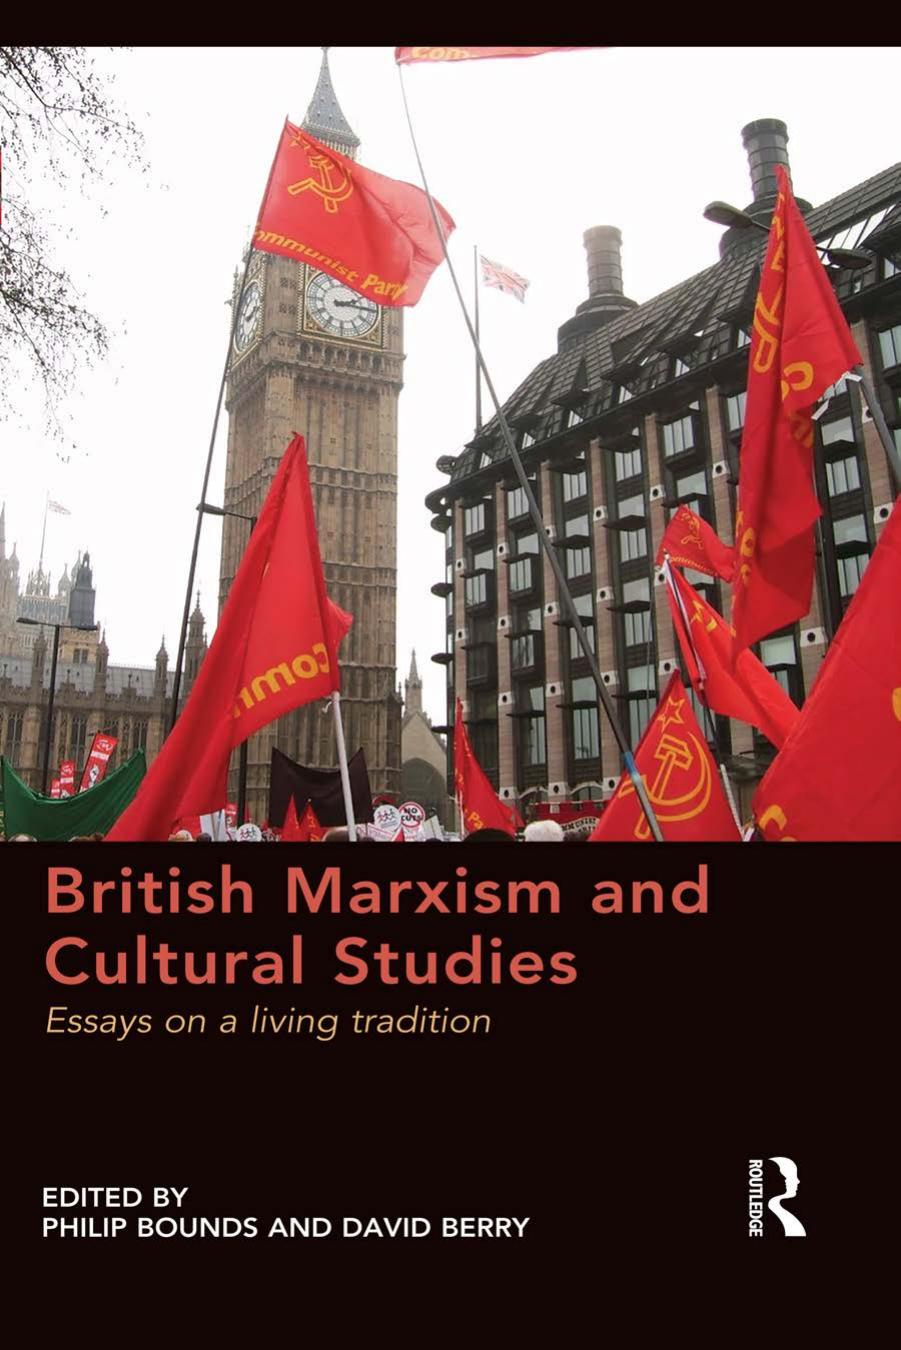 British Marxism and Cultural Studies: Essays on a Living Tradition